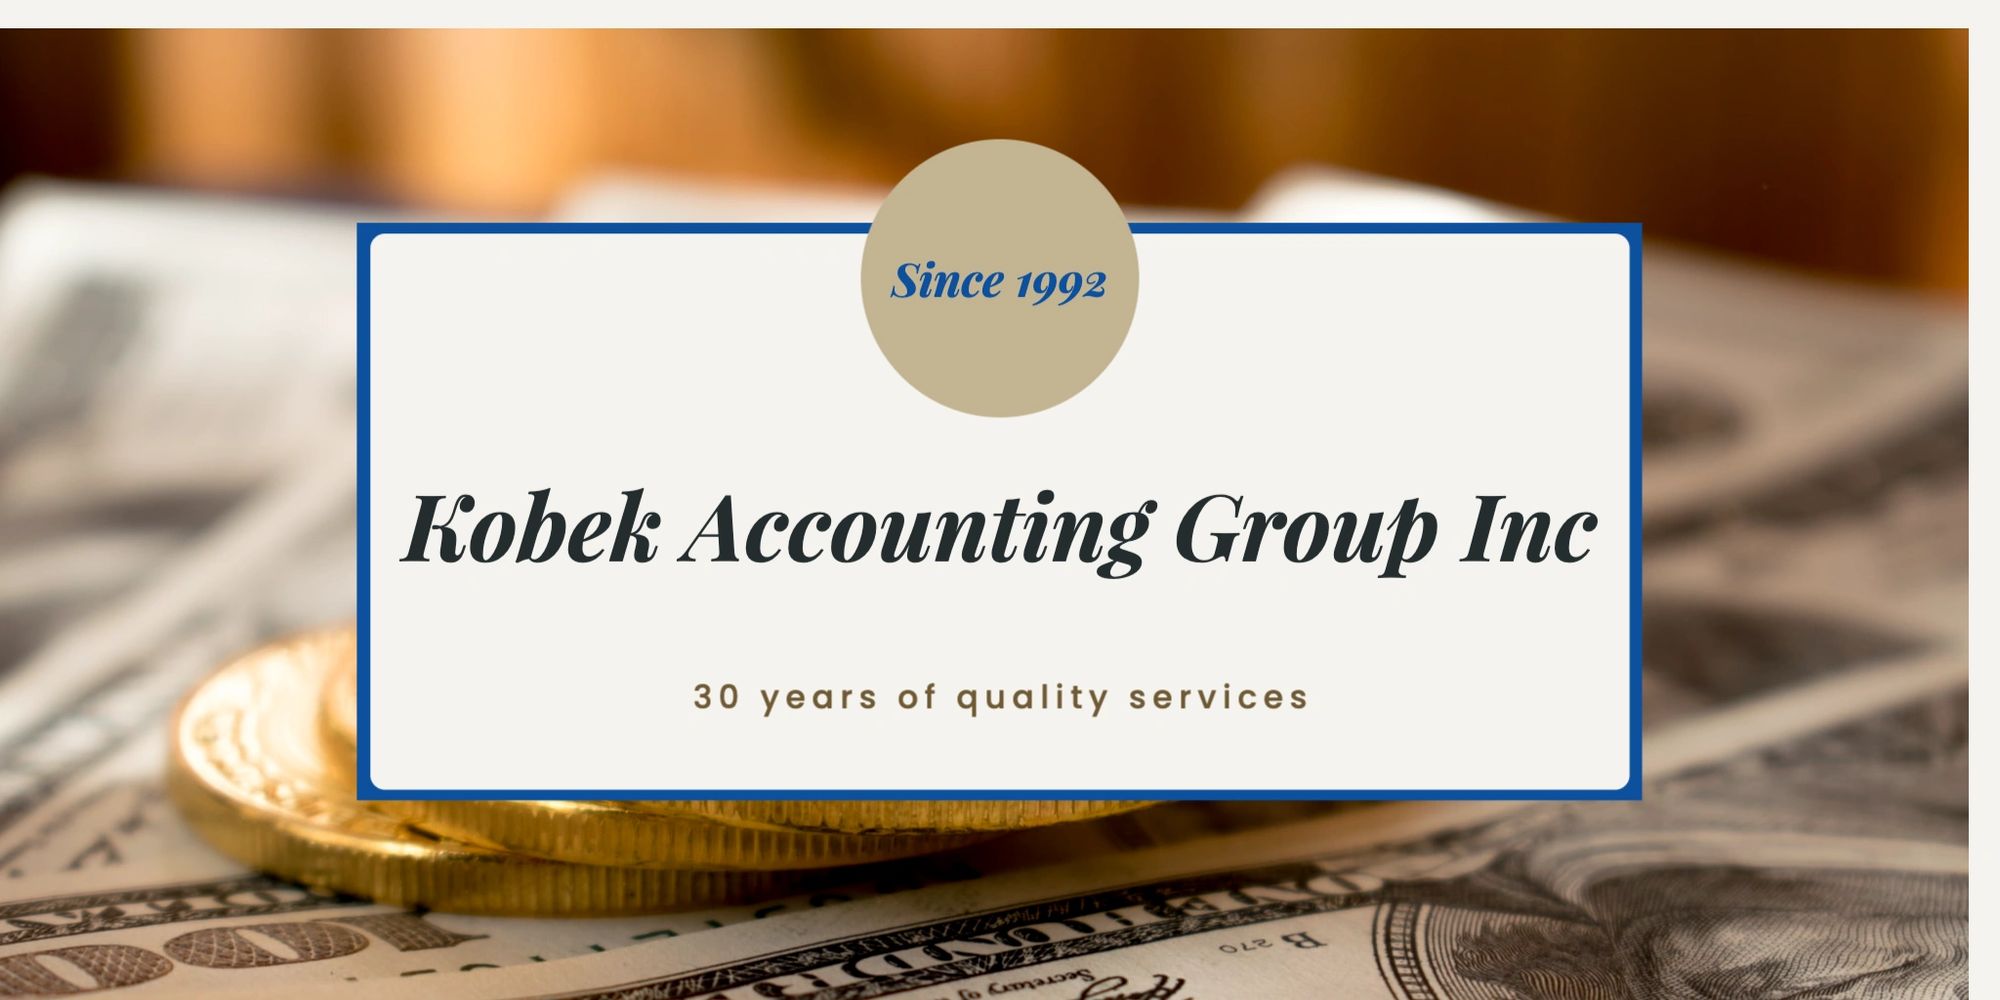 Accountant, Tax Preparation,Tax Relief, & Business Consulting in Santa Monica